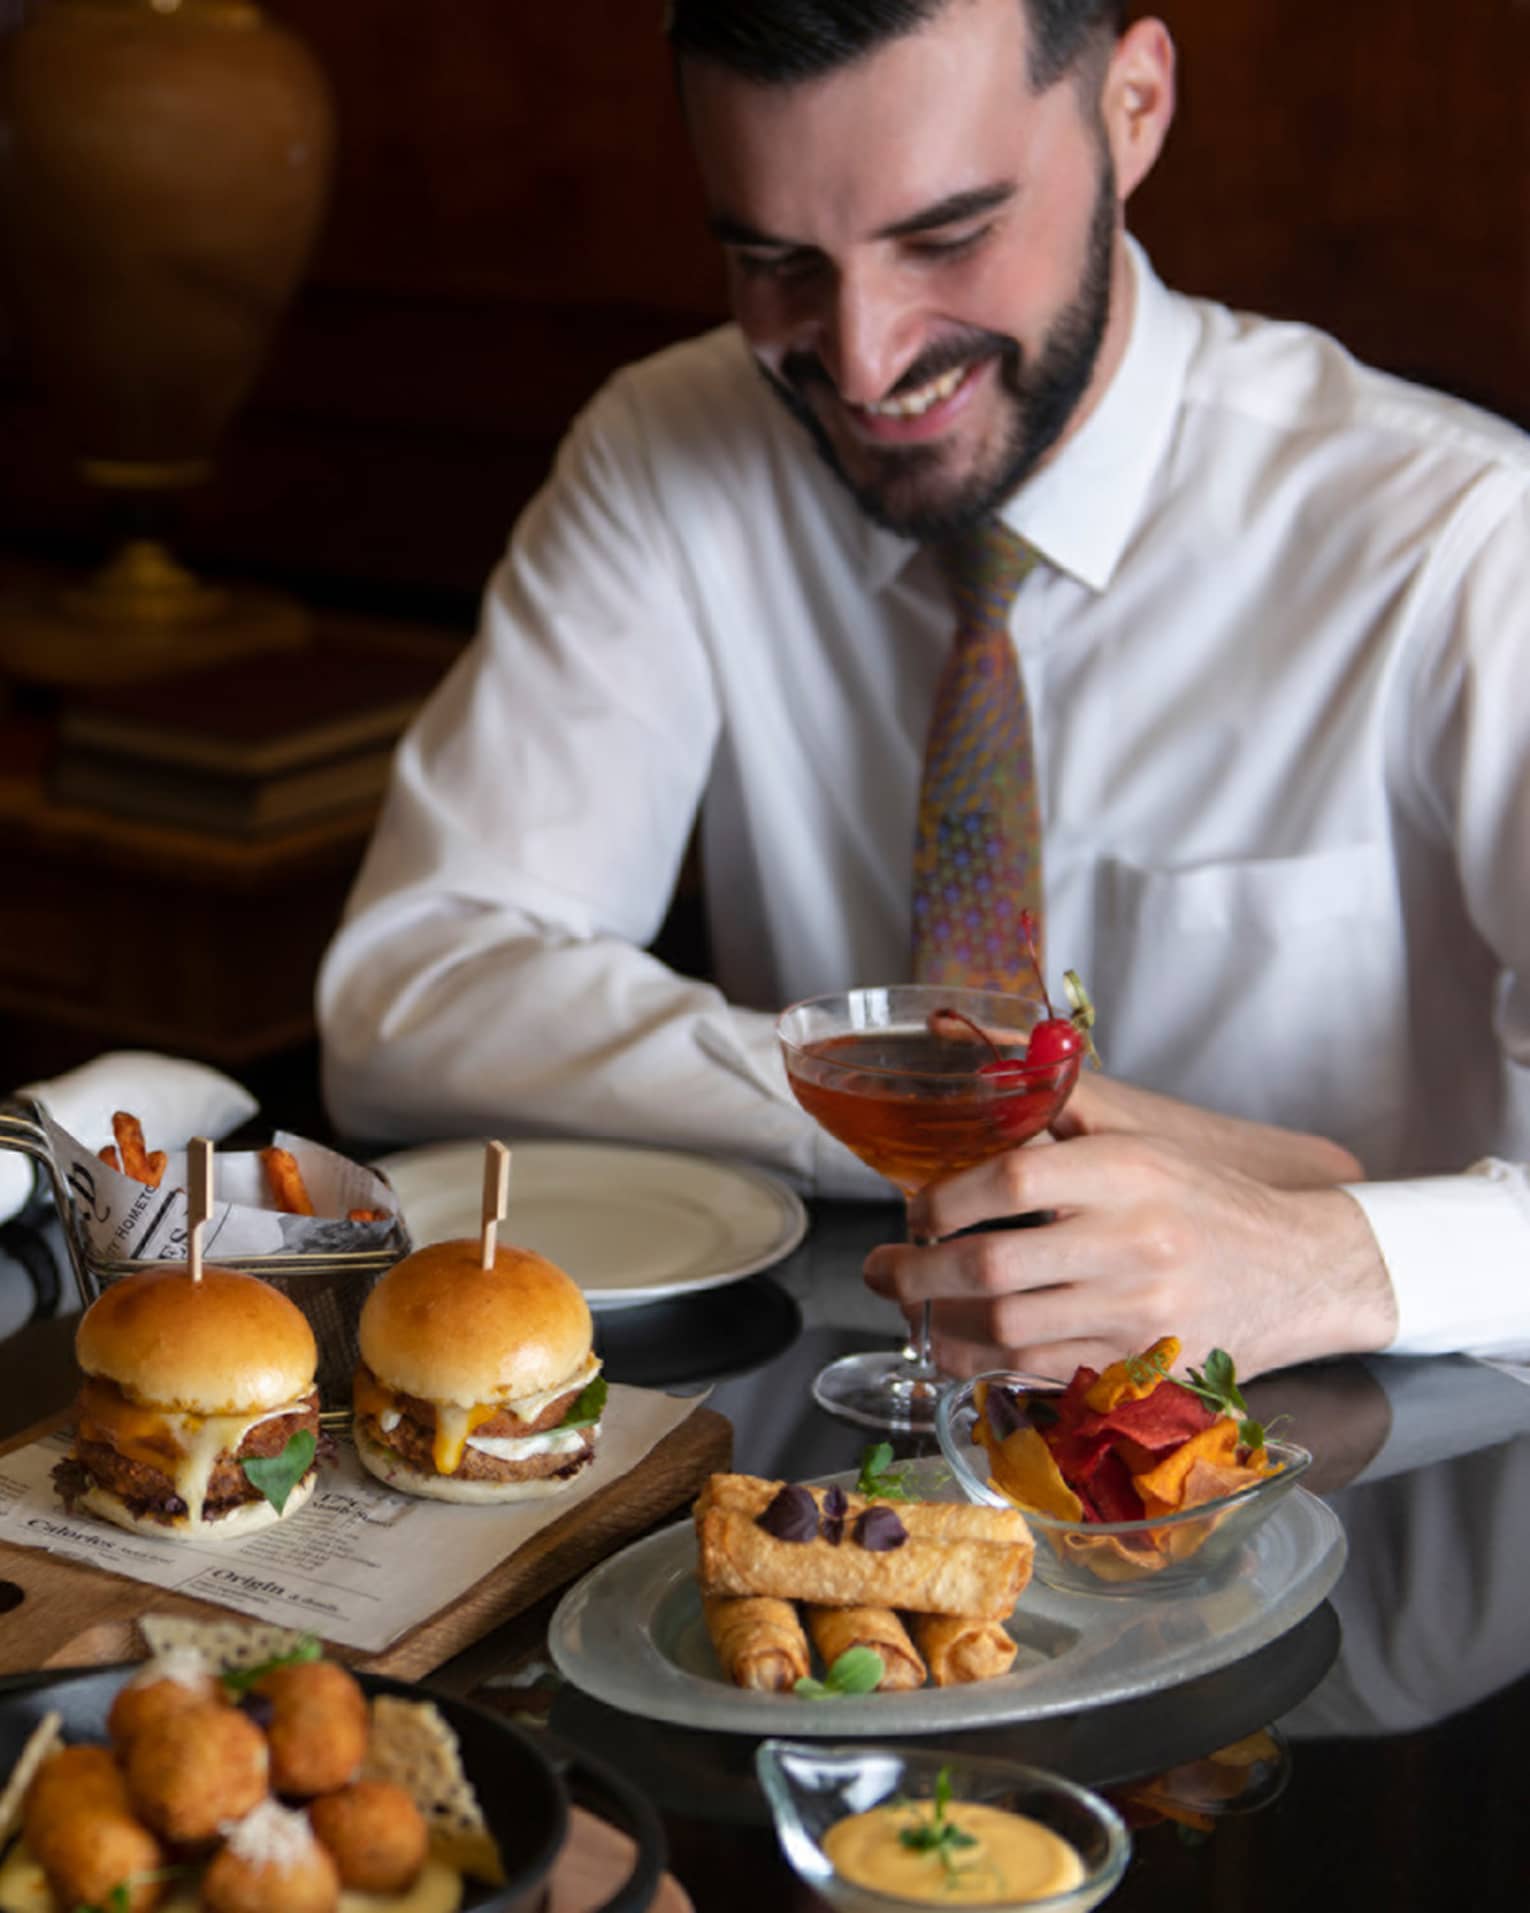 ,A couple dressed in semi-formal attire enjoys a spread of hamburger sliders, deep fried appetizers and cocktails